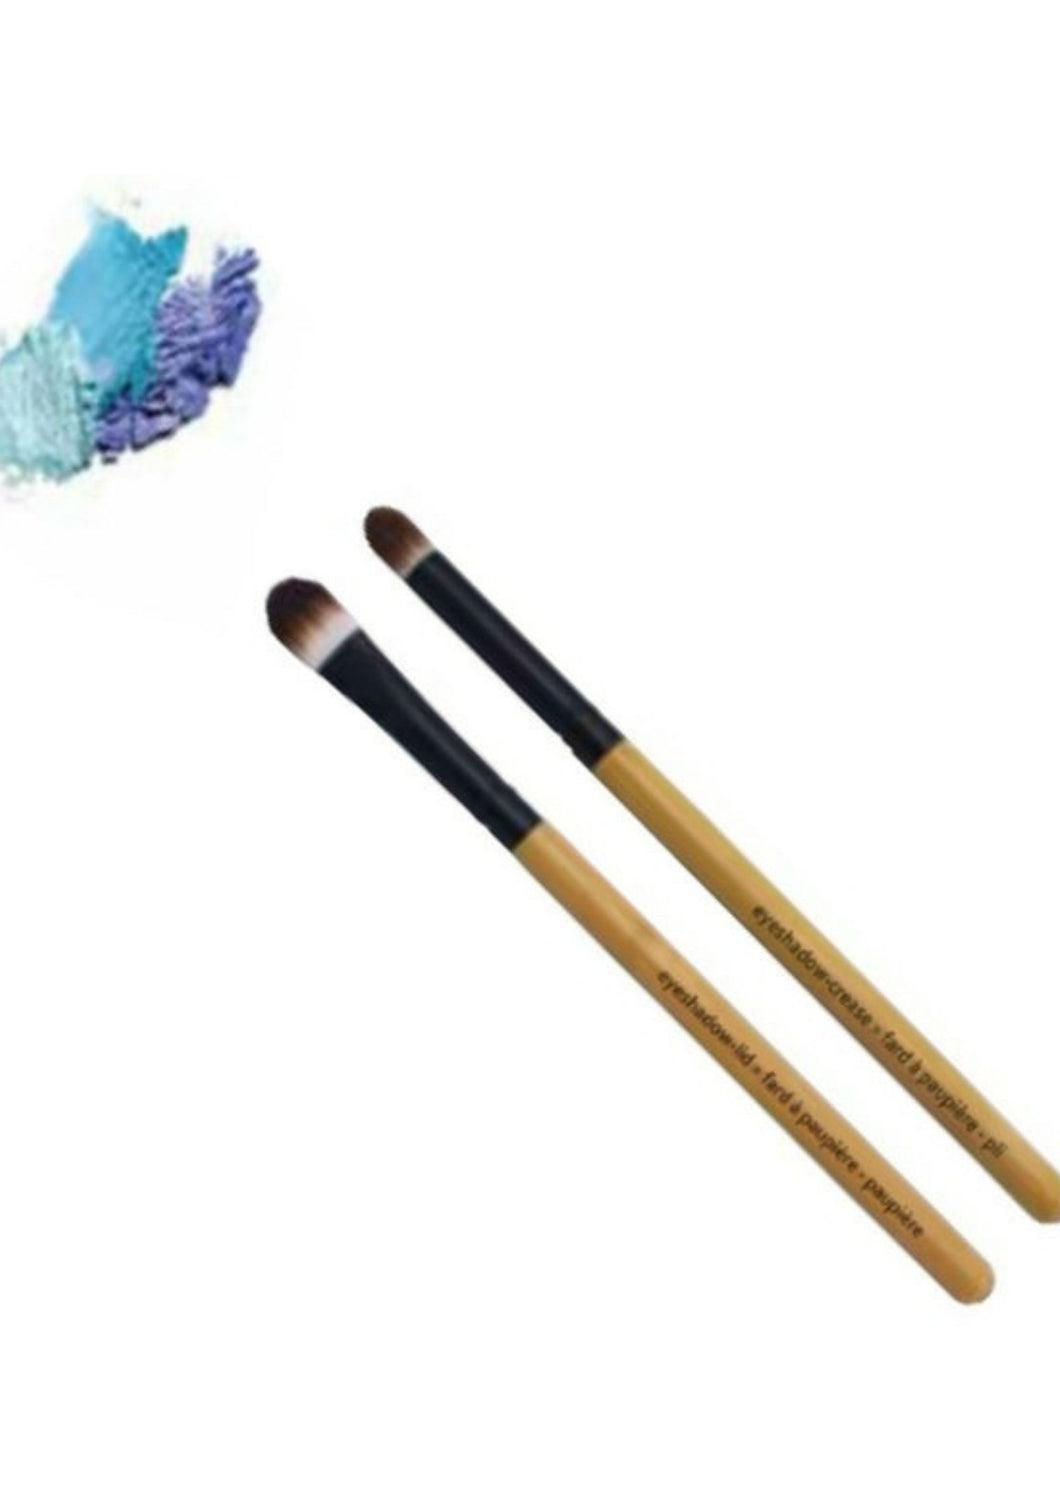 Brush on a beautiful face anywhere with the Lovely Lid Duo. Urban Spa's Lovely Lid Dup has vegan fibre brushes are perfect for the bathroom, boardroom or your backpack. The Lovely Lid Duo features eye shadow brushes for both lid and crease.  Perfect for travel. To apply makeup on the eyes. Eco-friendly materials. $15.00